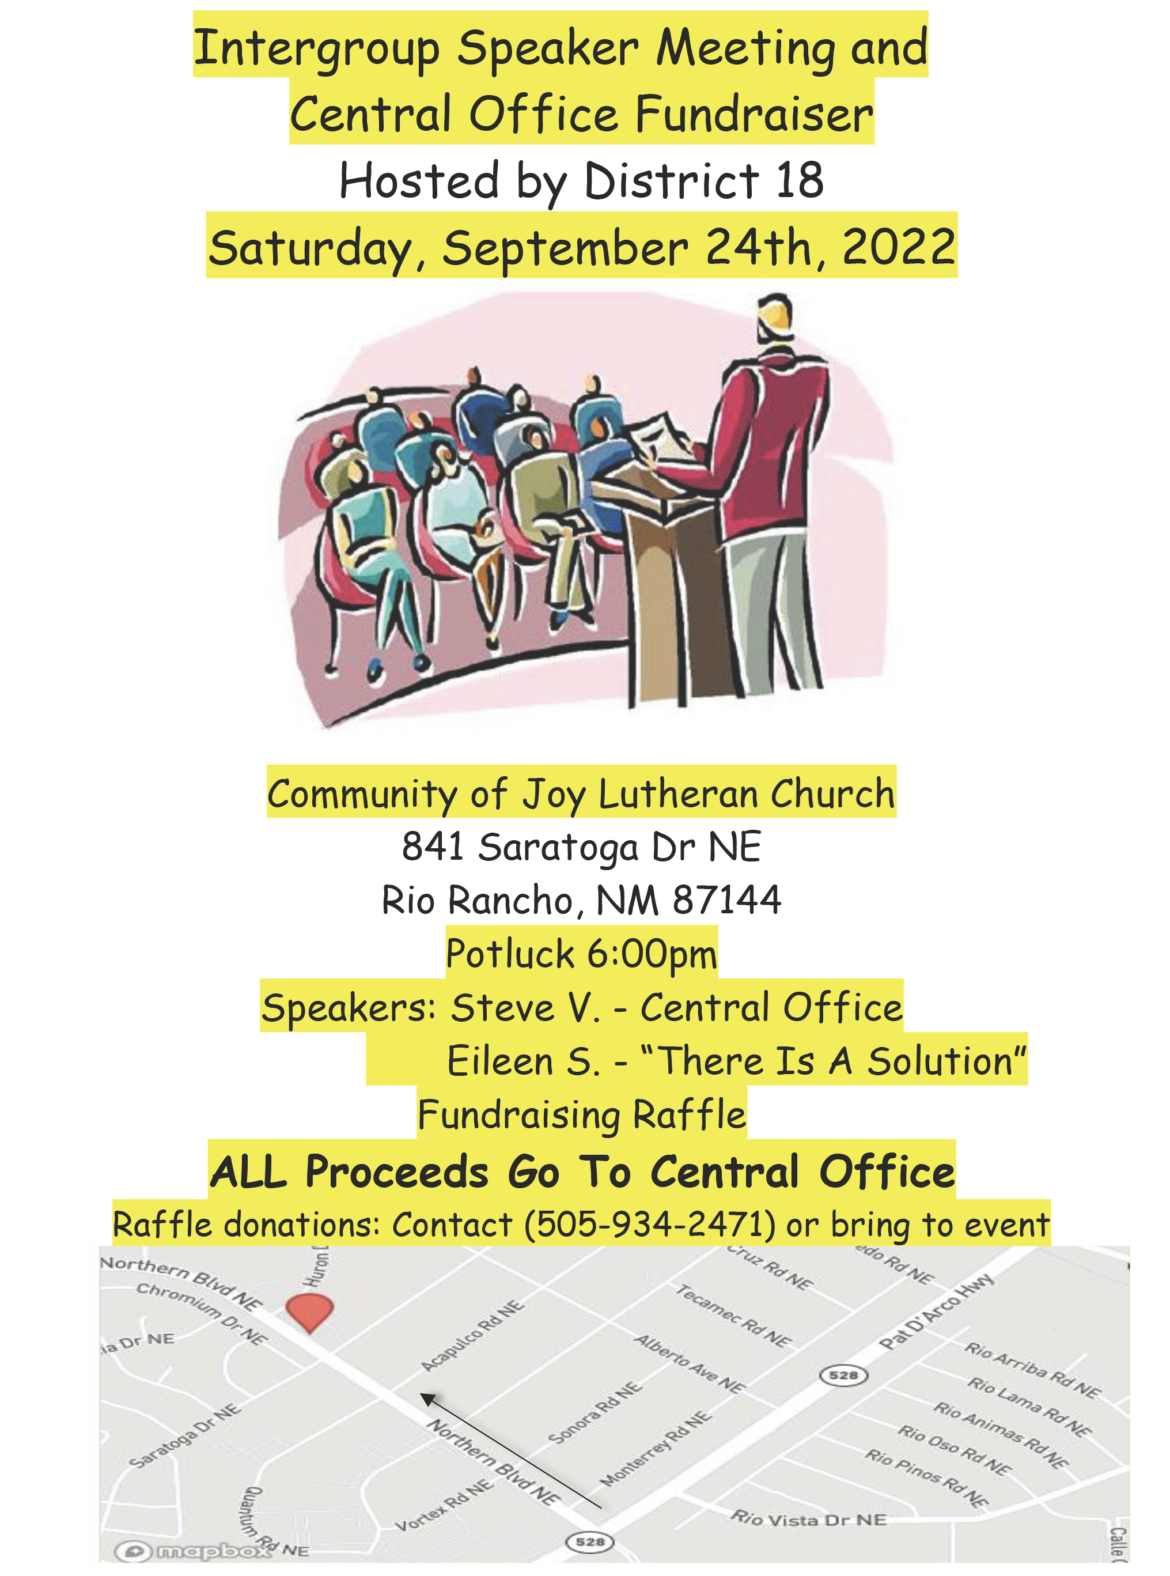 Intergroup Speaker Meeting and Central Office Fundraiser Flyer